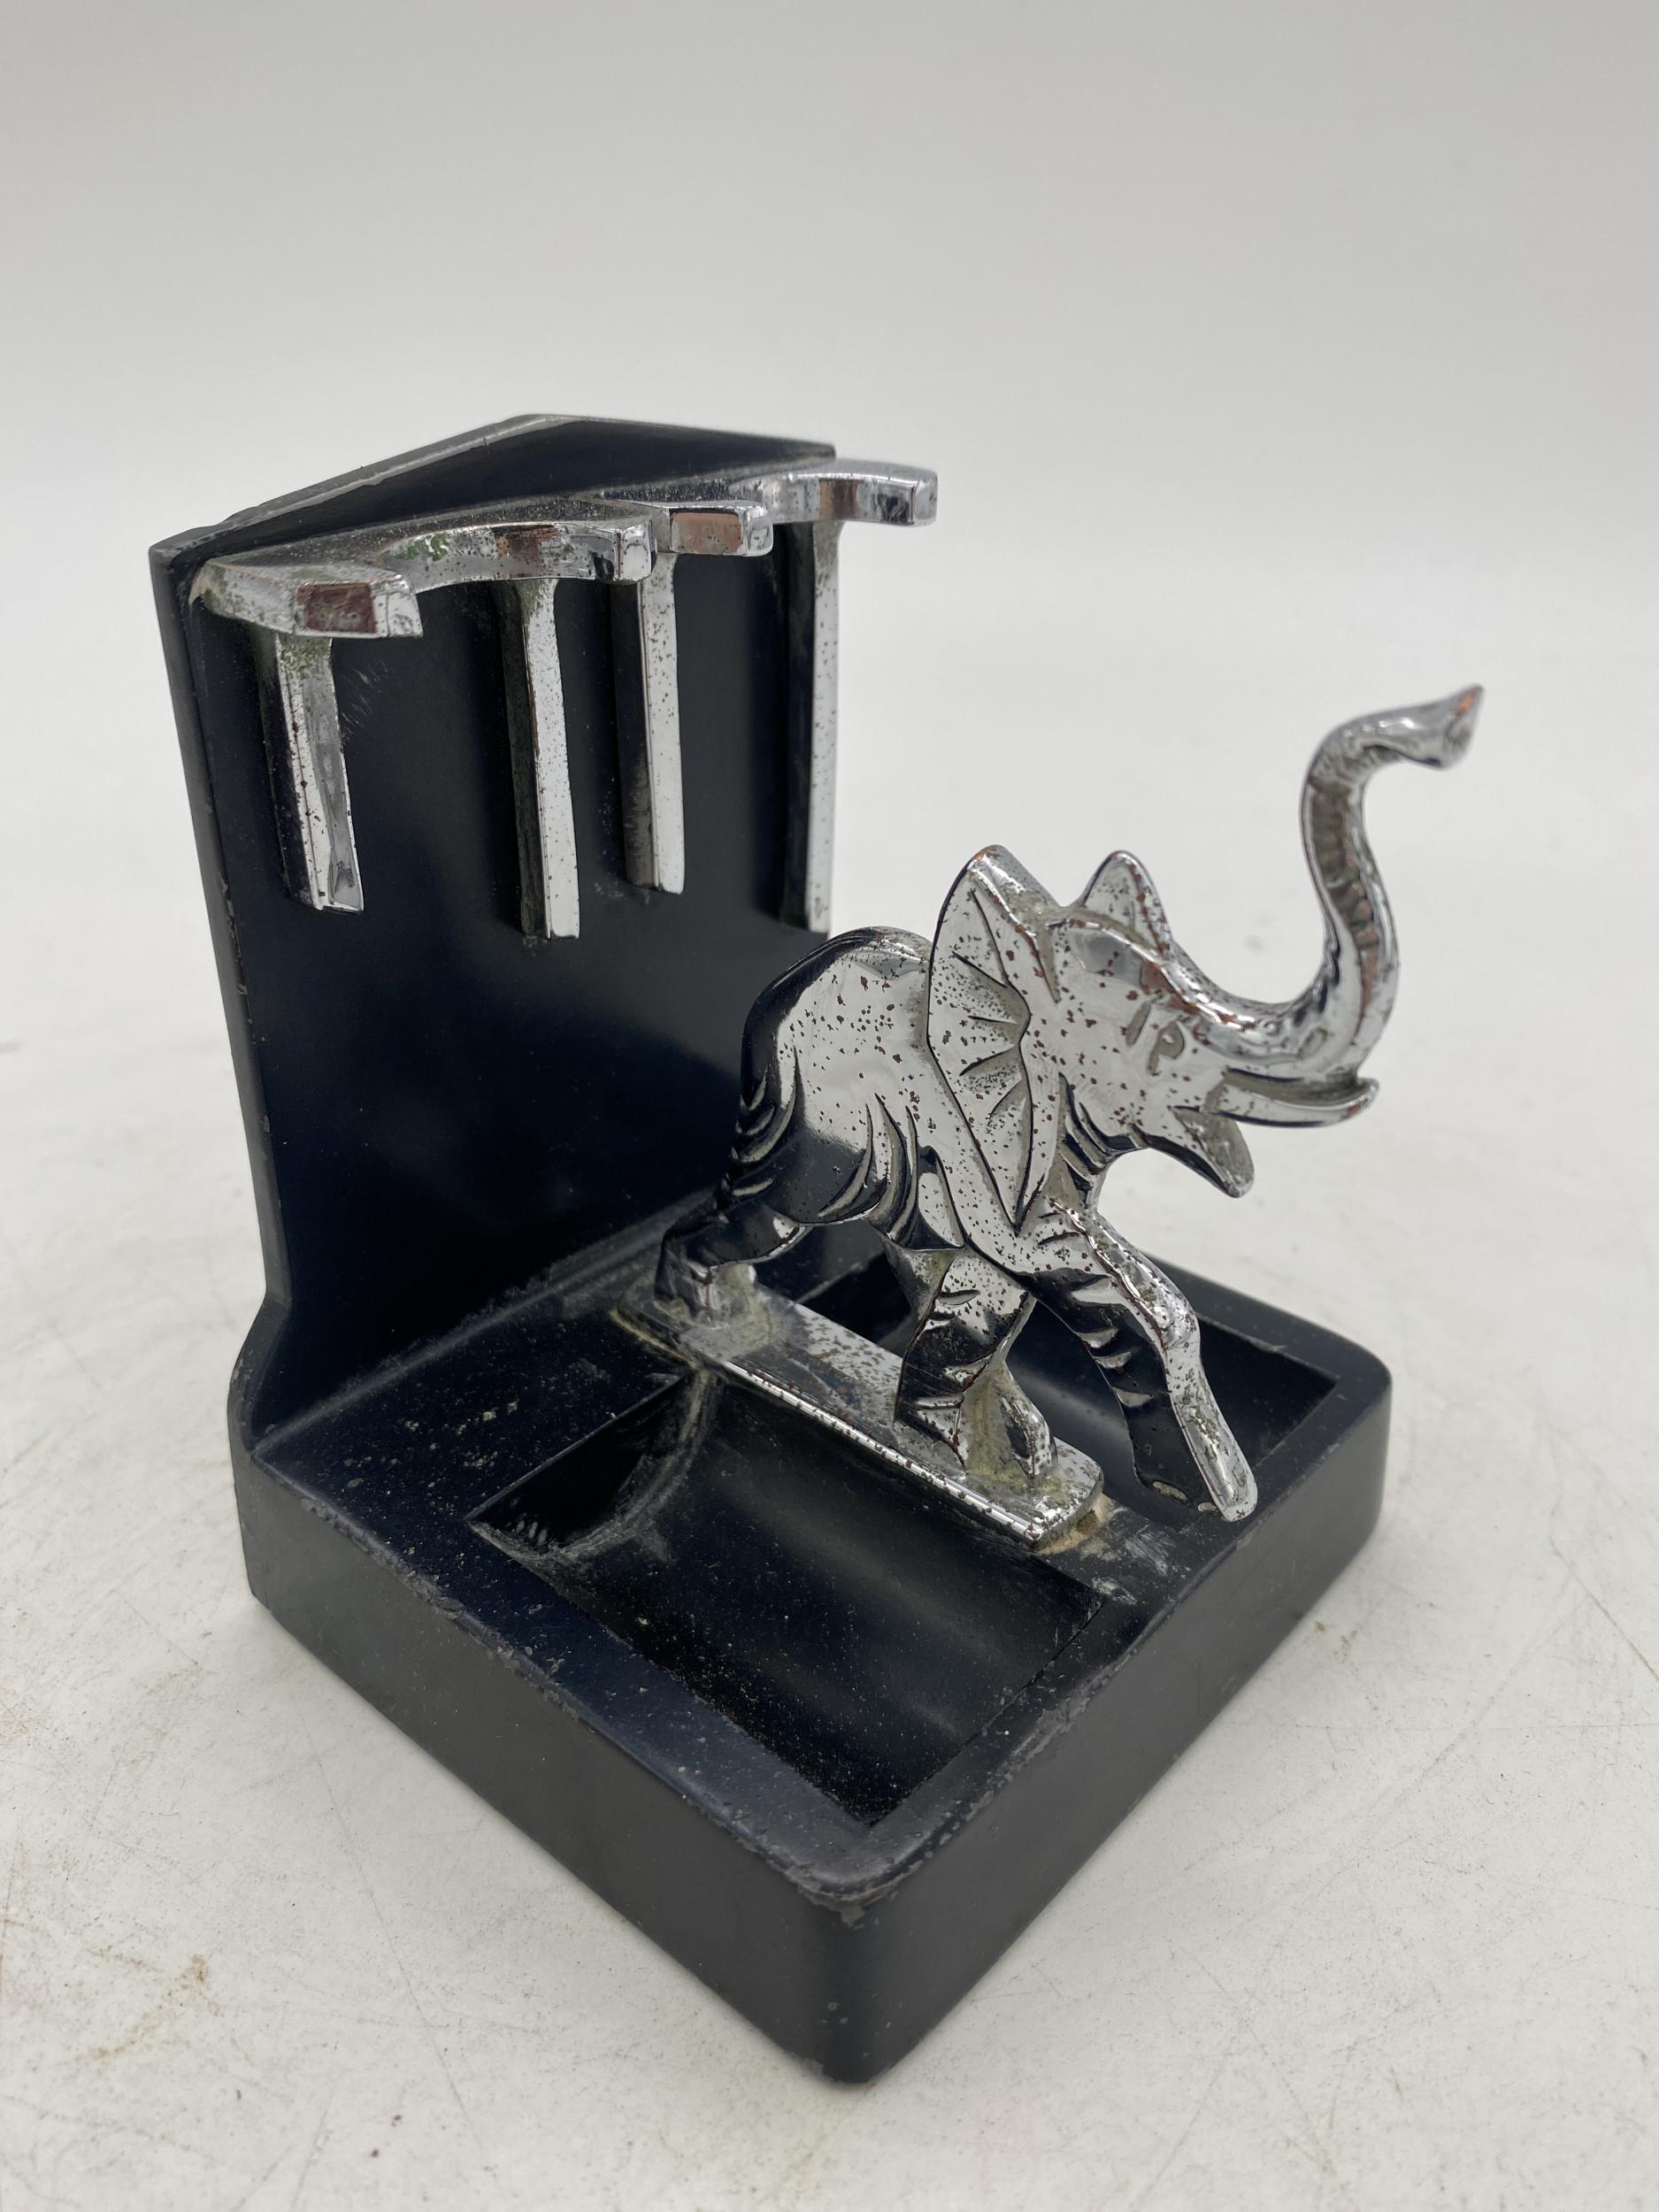 A ronson elephant two pipe holder with a chrome elephant and accents with a black powder coat base. It is listed in advertisement 